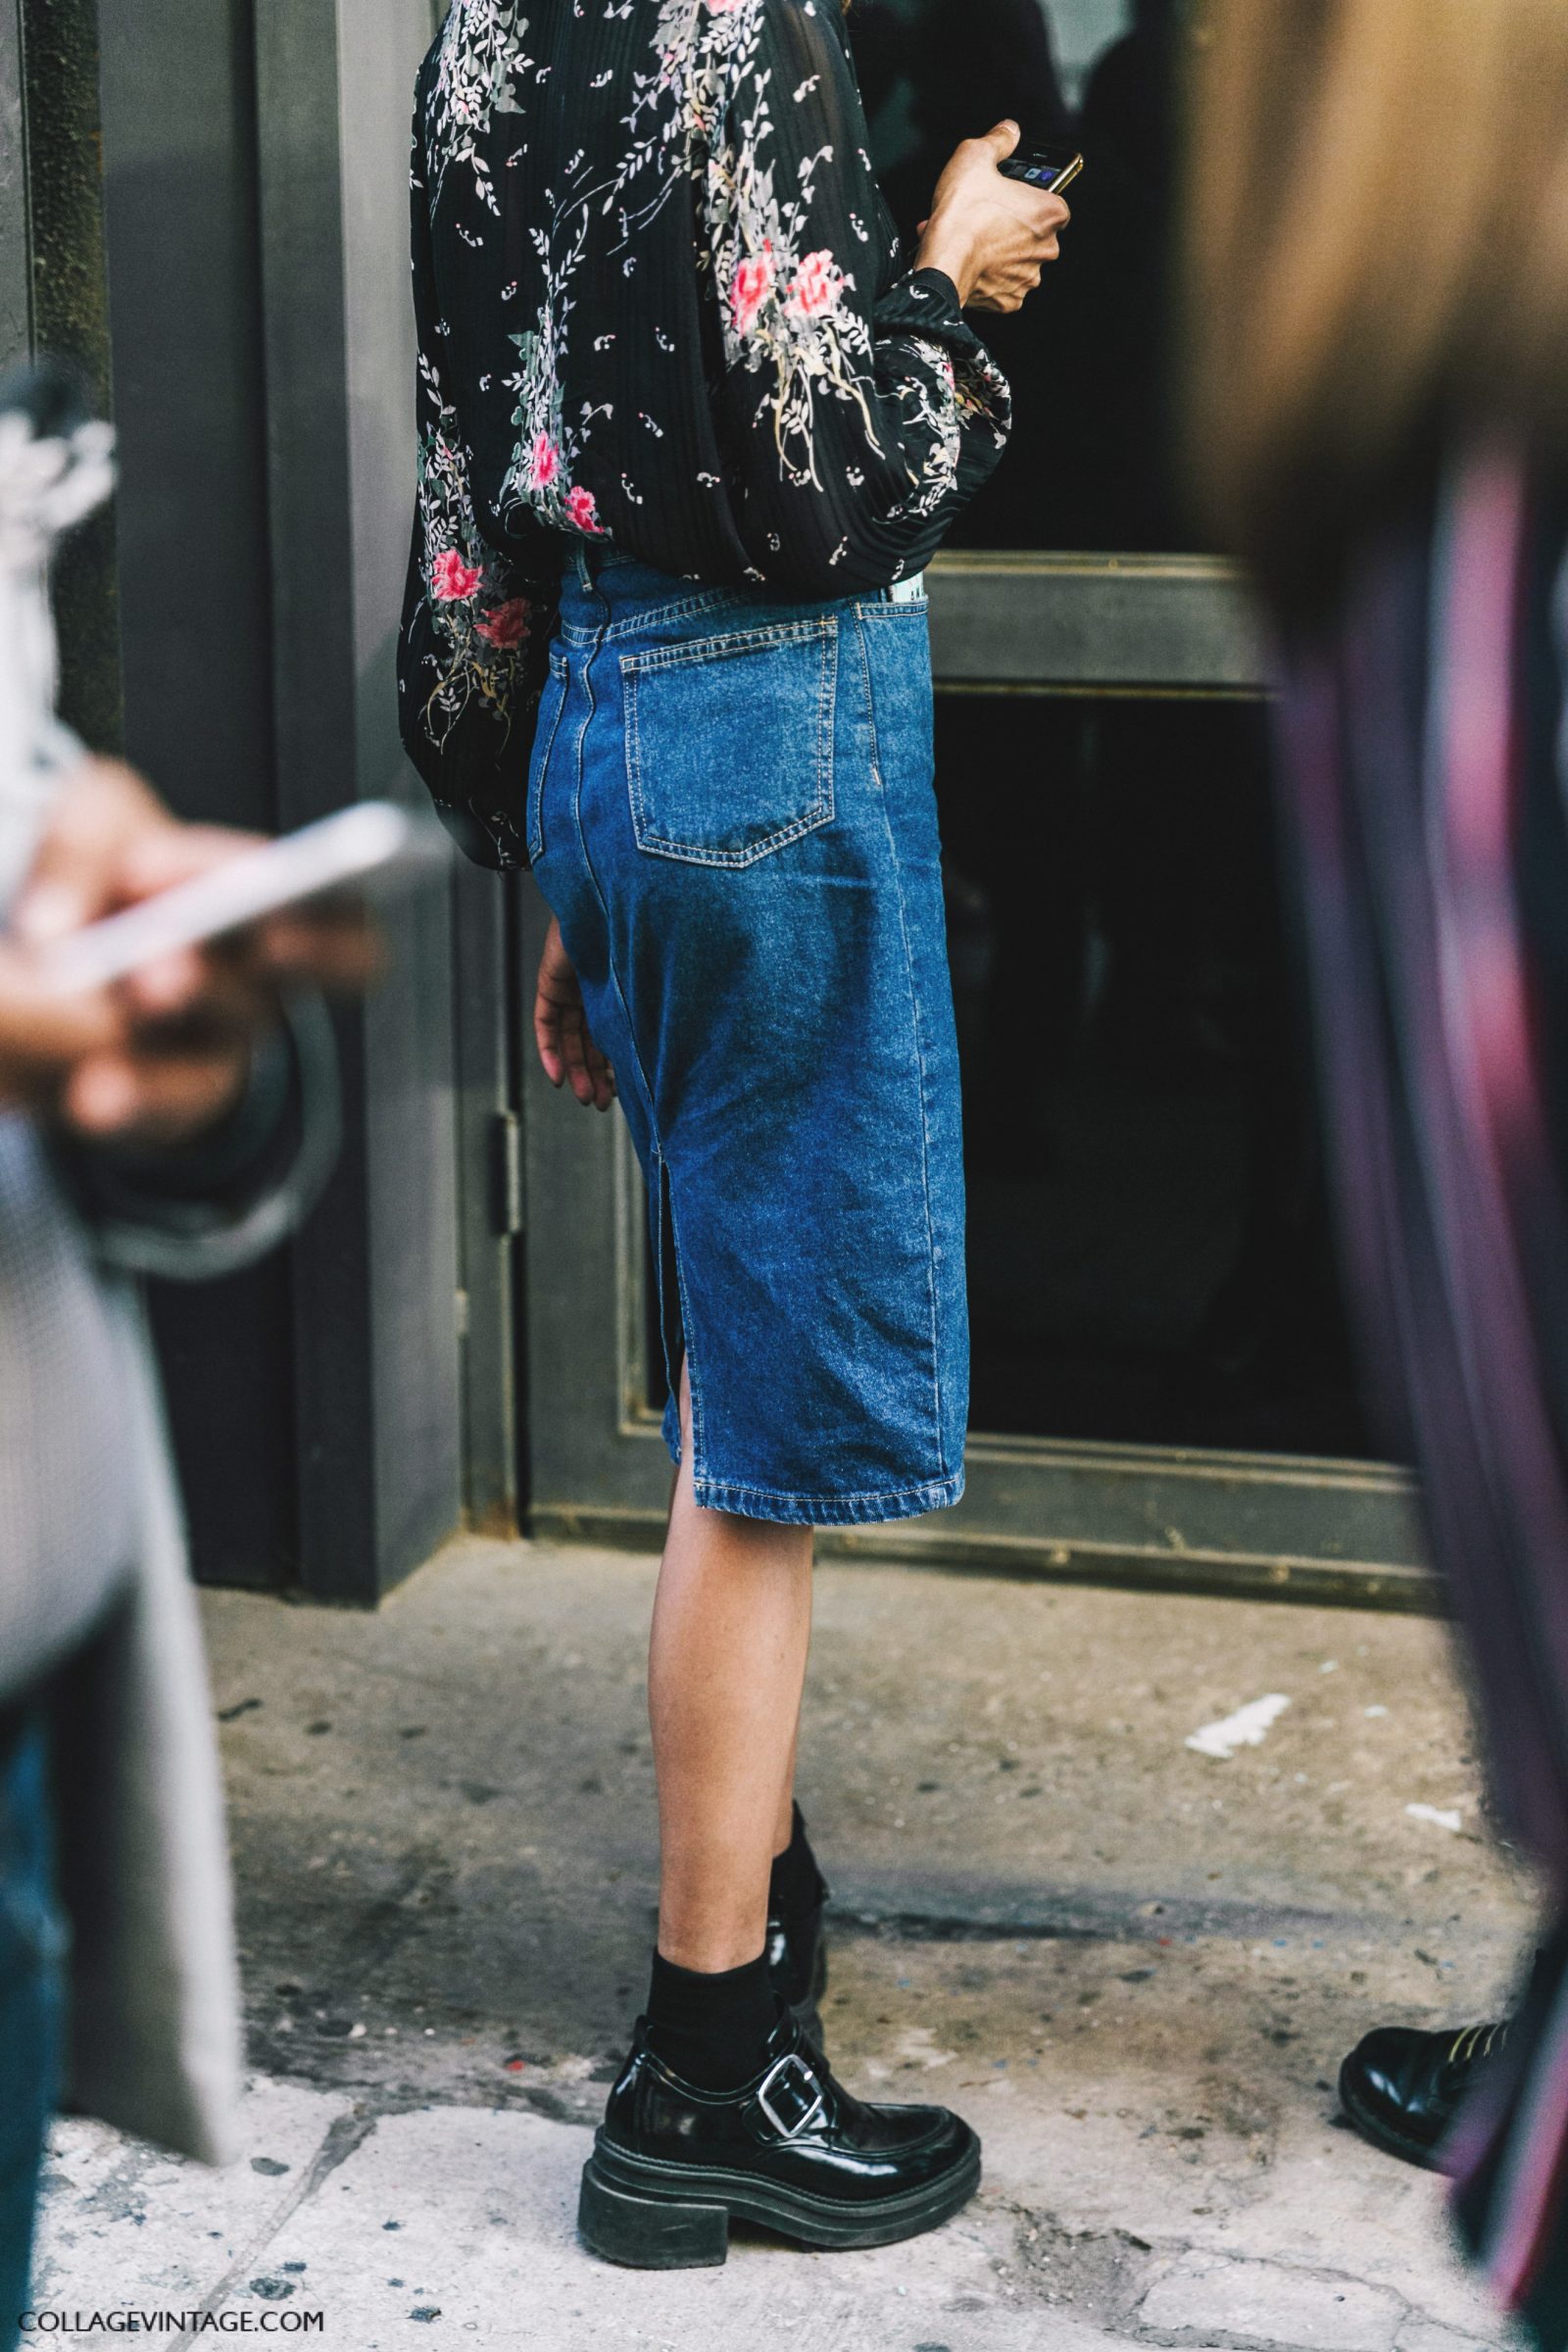 nyfw-new_york_fashion_week_ss17-street_style-outfits-collage_vintage-denim_skirt-floral_shirt